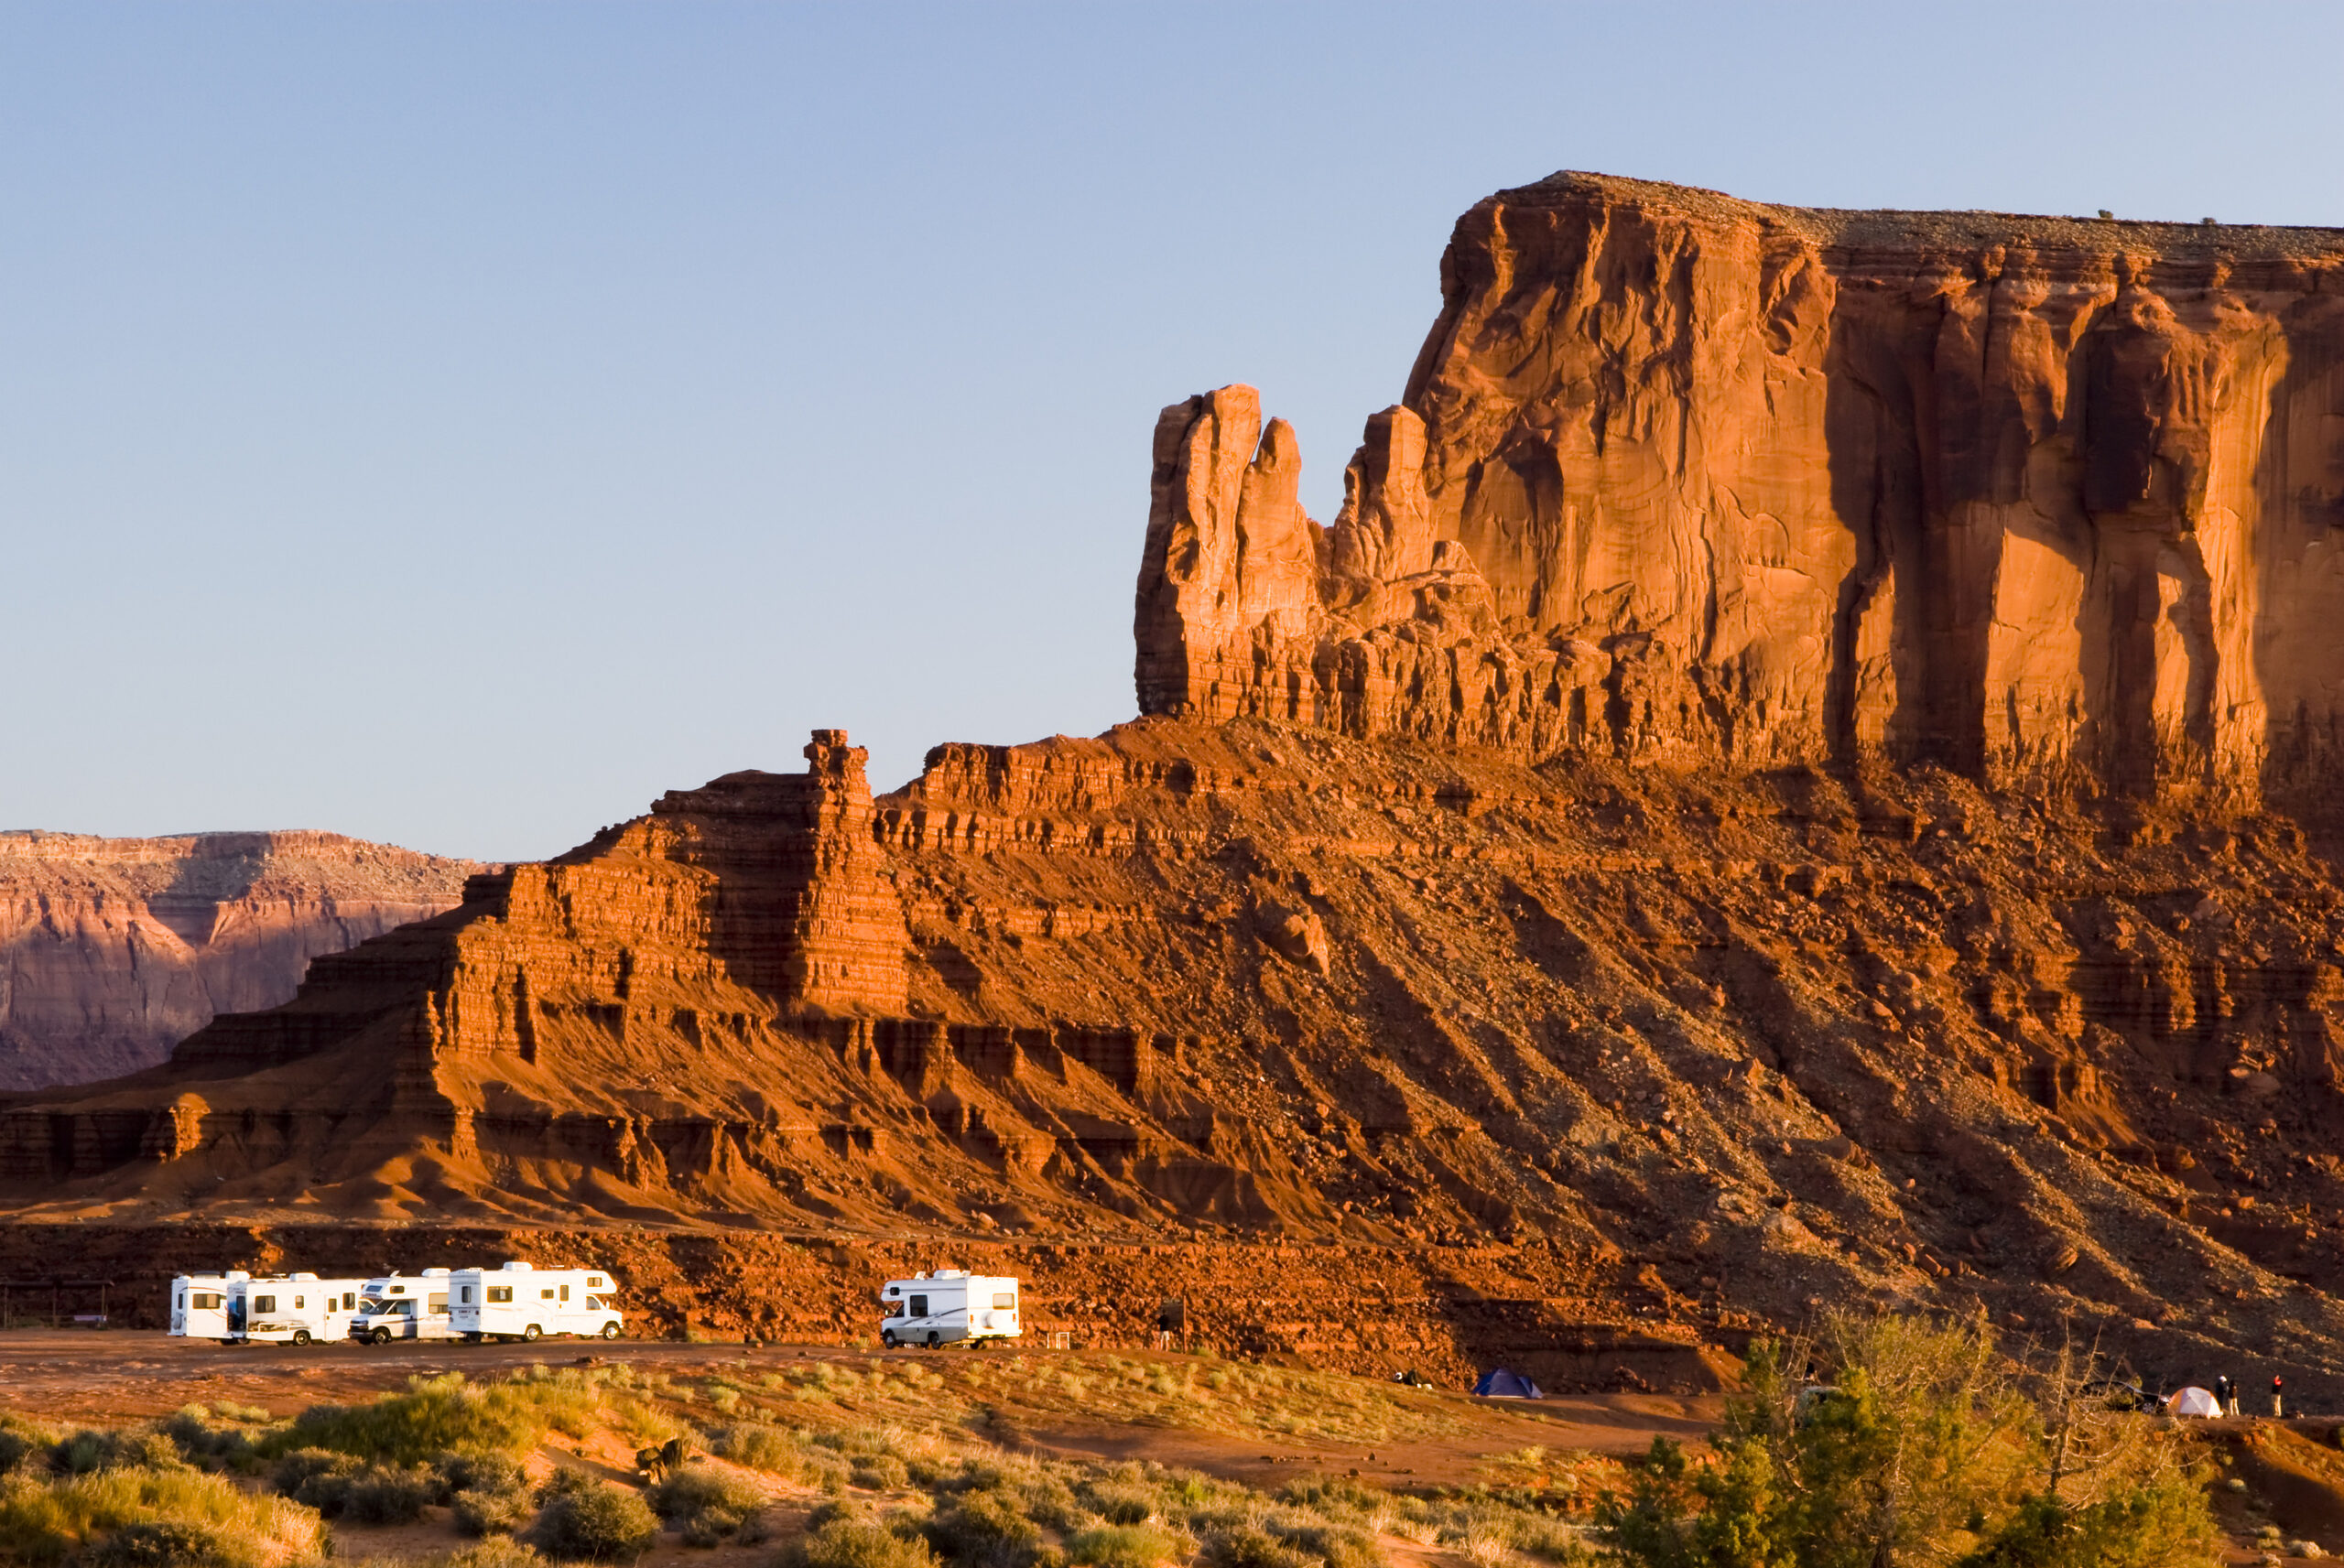 Long-term camping in Monument Valley, Arizona